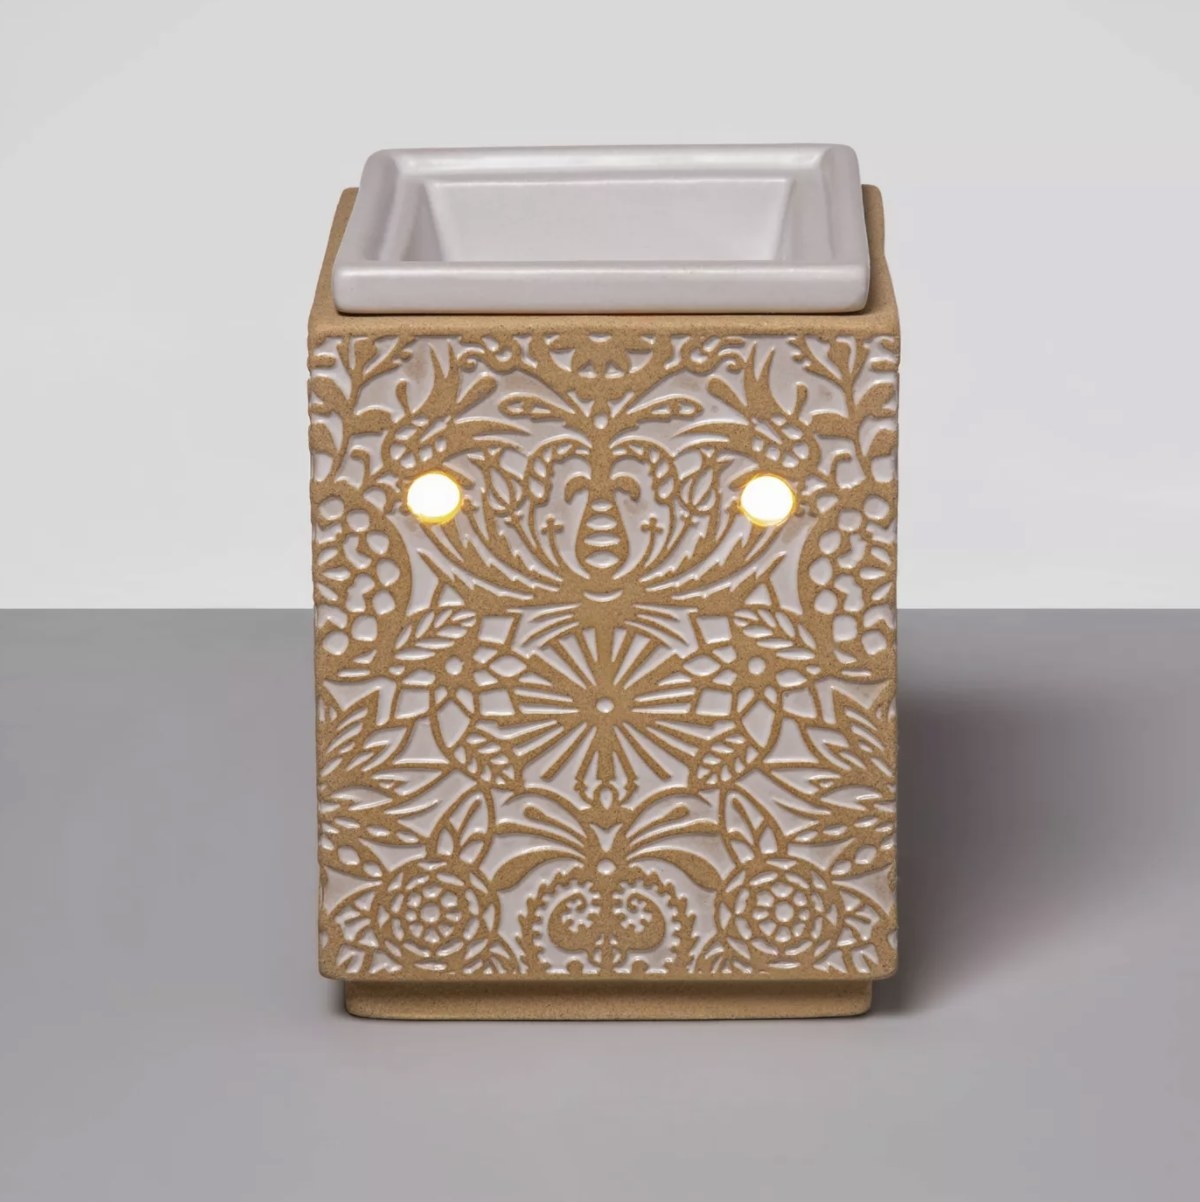 The tan and white embossed ceramic warmer has a white tray and two light holes glowing warm orange